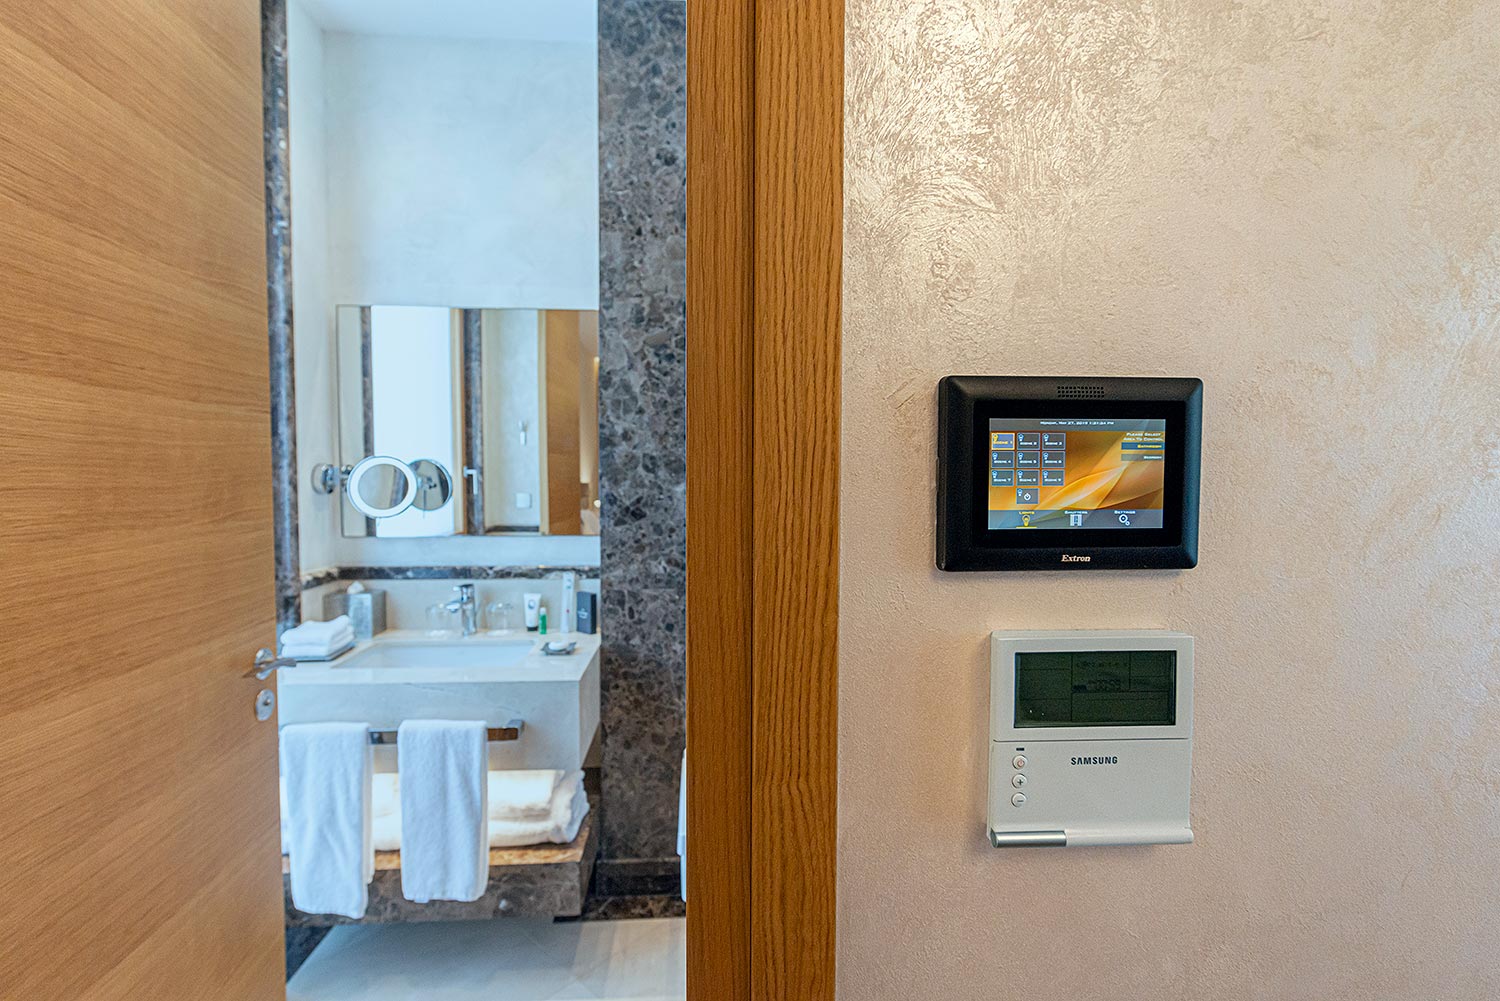 Wall-mounted touchpanel placed next to a bathroom entrance